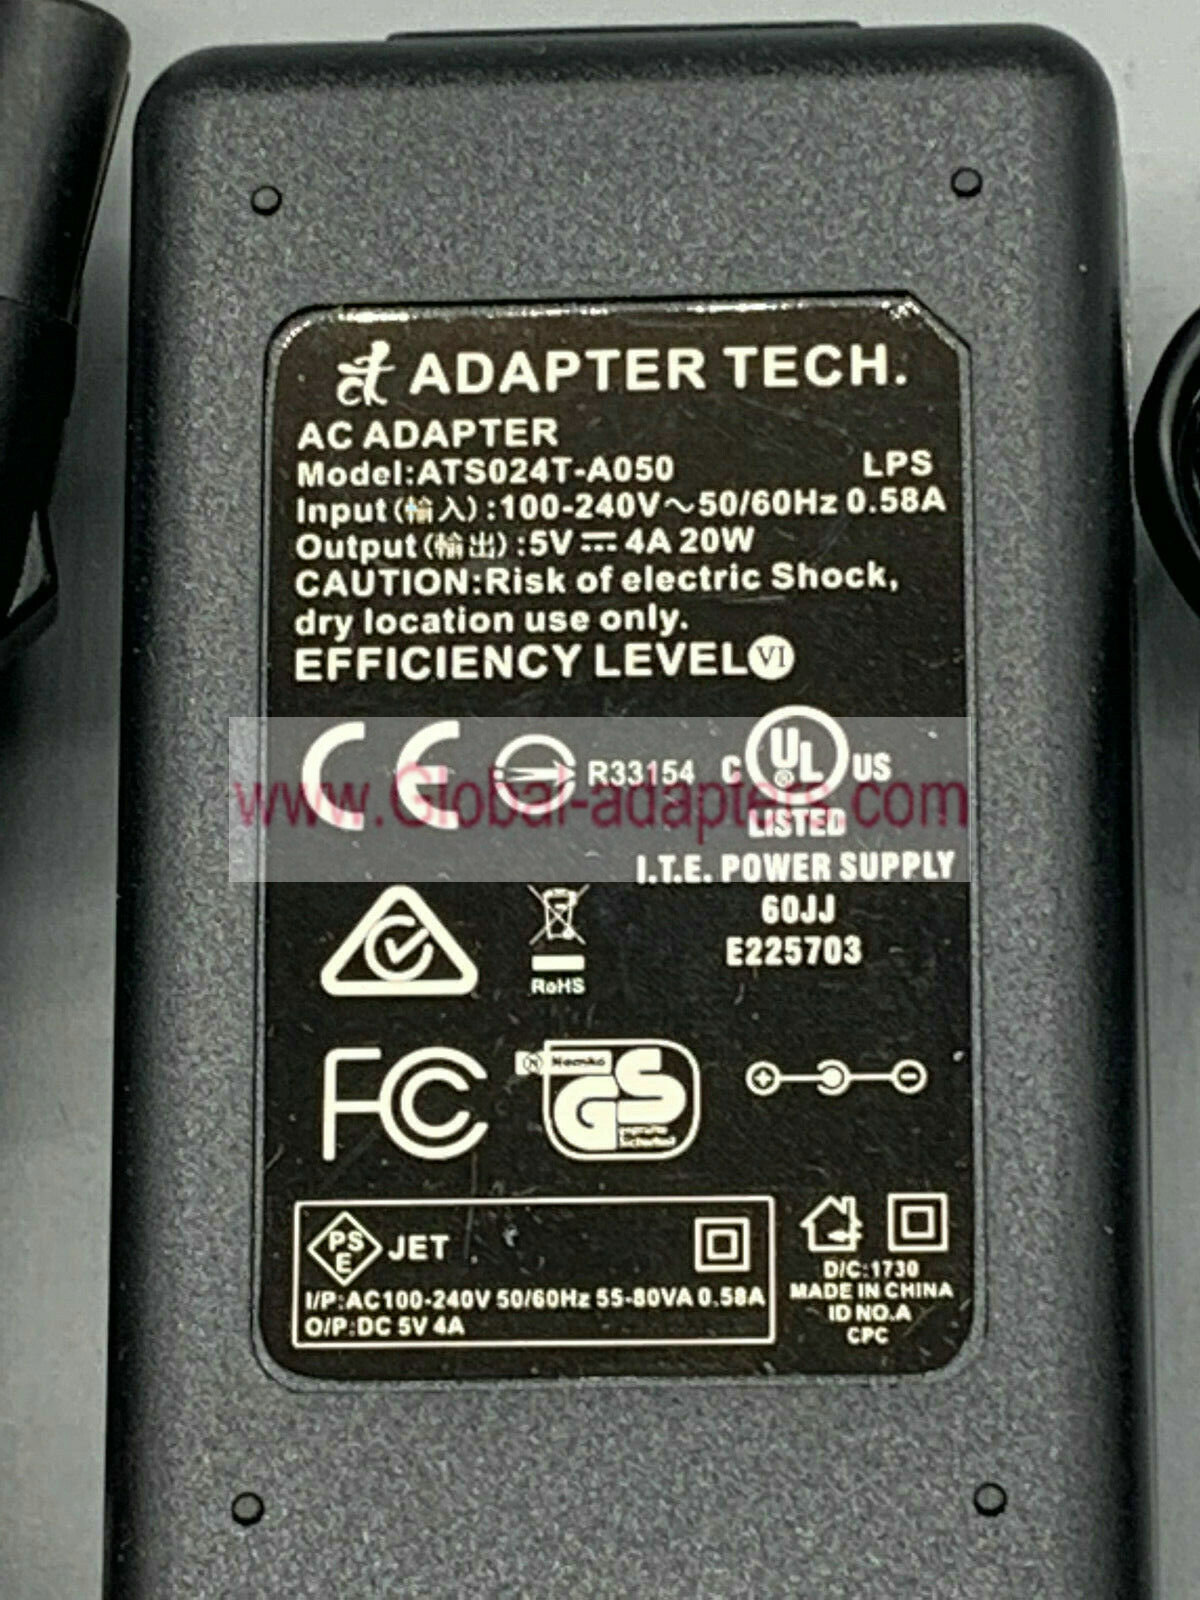 New ADAPTER TECH ATS024T-A050 5V 4A AC ADAPTER power supply charger